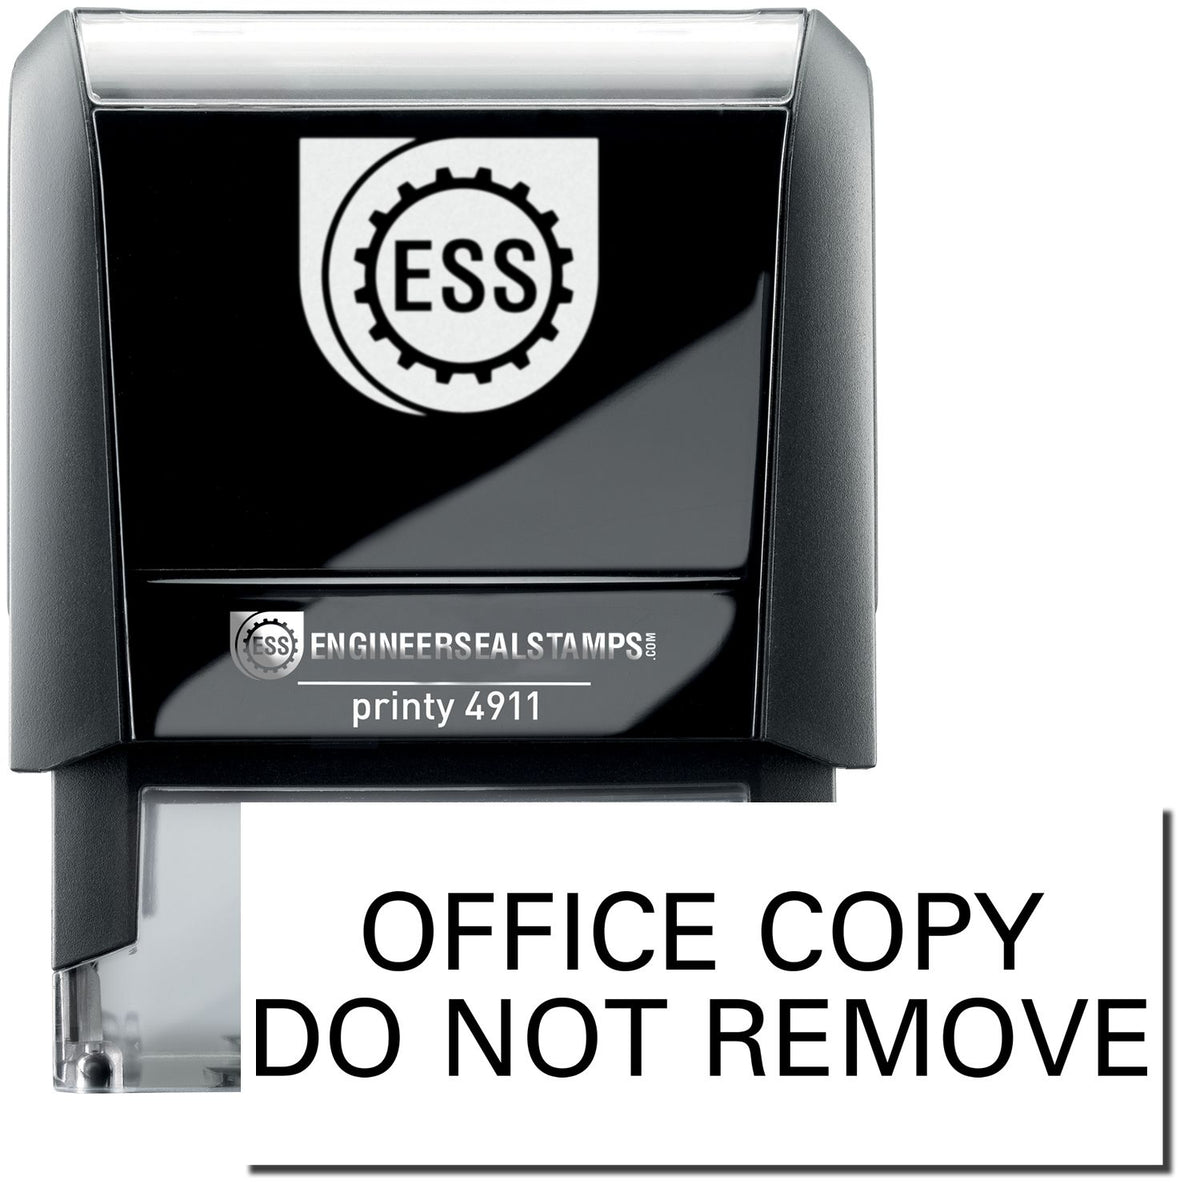 A self-inking stamp with a stamped image showing how the text &quot;OFFICE COPY DO NOT REMOVE&quot; is displayed after stamping.